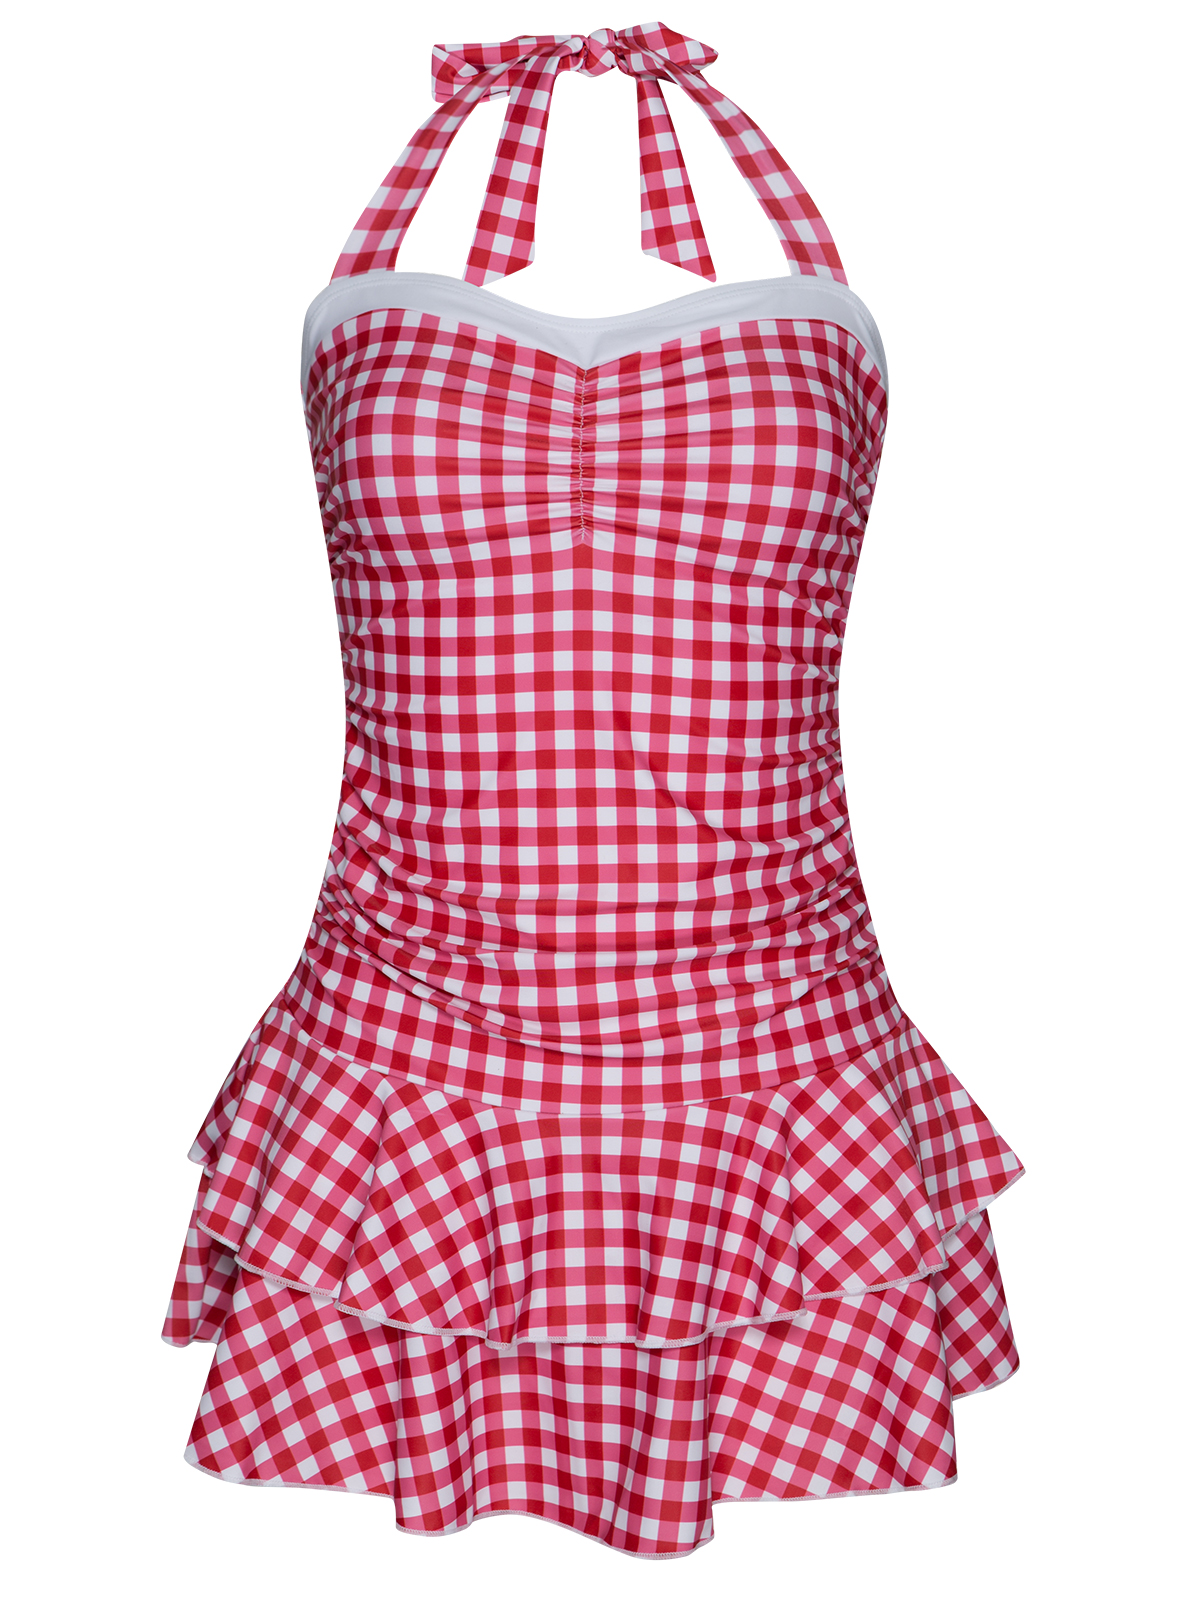 PUSSY DELUXE DAMEN BADEANZUGMarke: Pussy DeluxeModell: Red Plaid SwimsuitProdukt Nr.: 39214Farbe: rot alloverHauptmaterial: 80% Polyester